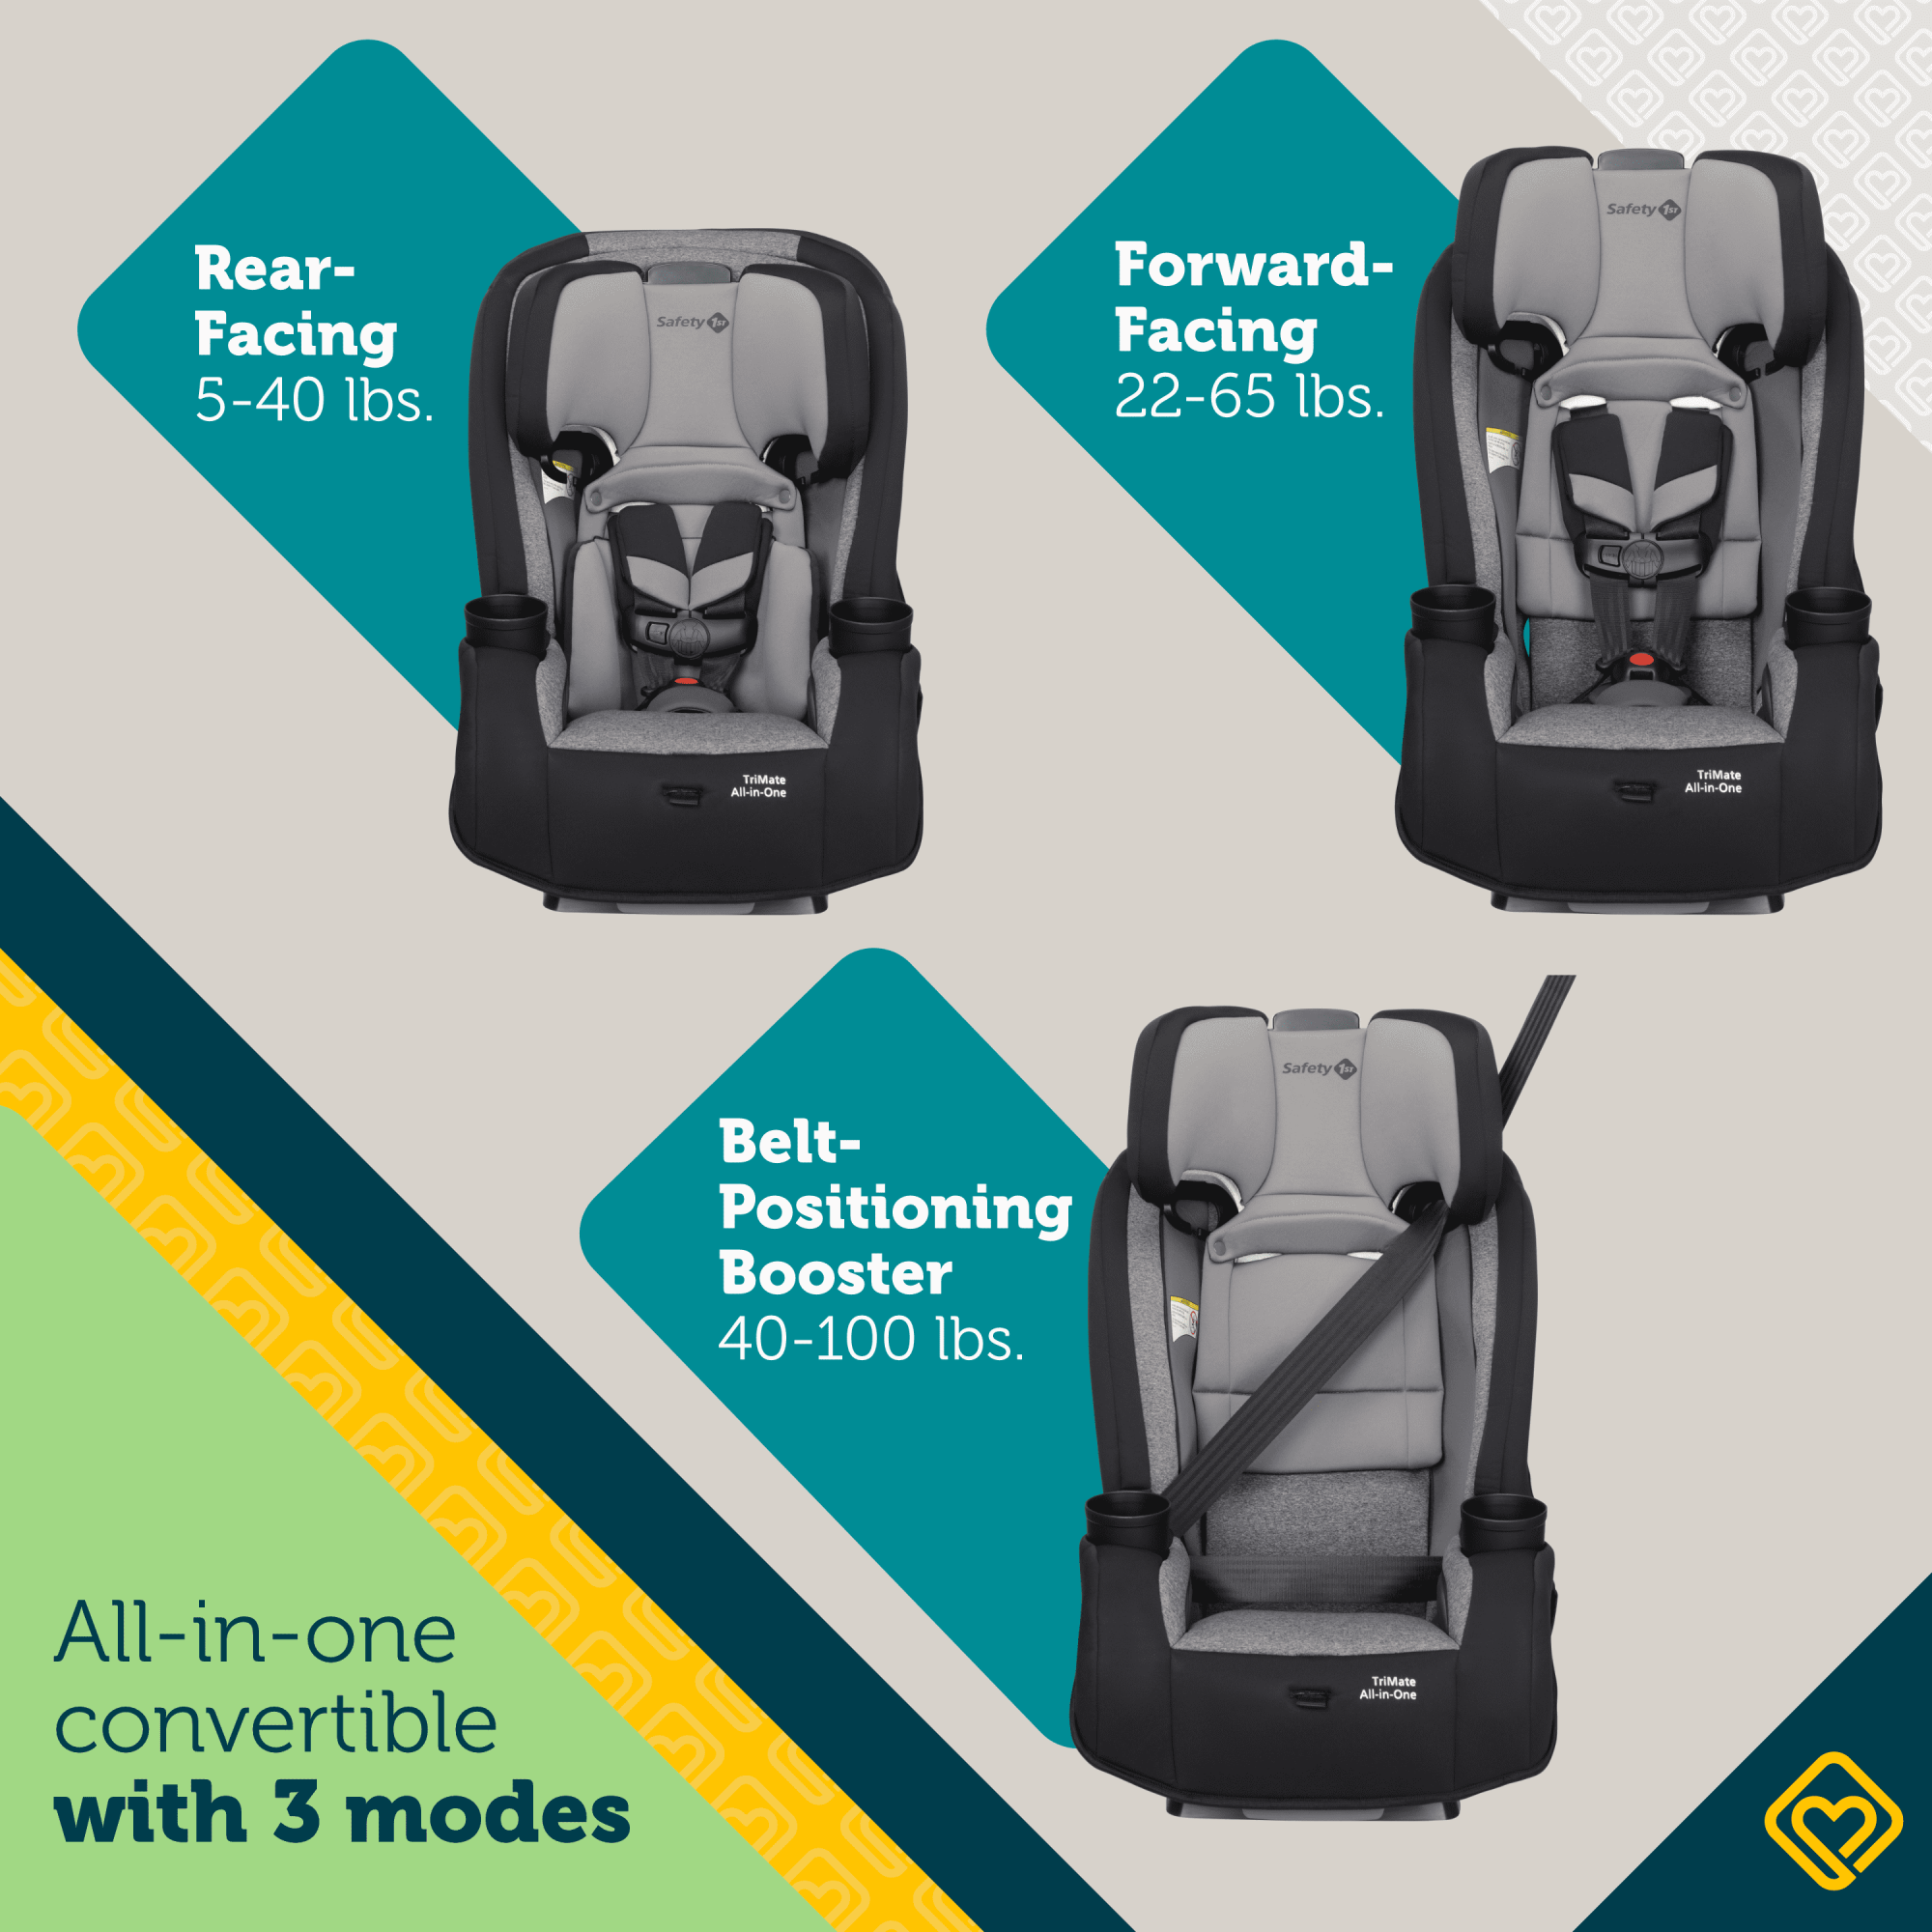 TriMate™ All-in-One Convertible Car Seat - High Street - 45 degree angle view of left side